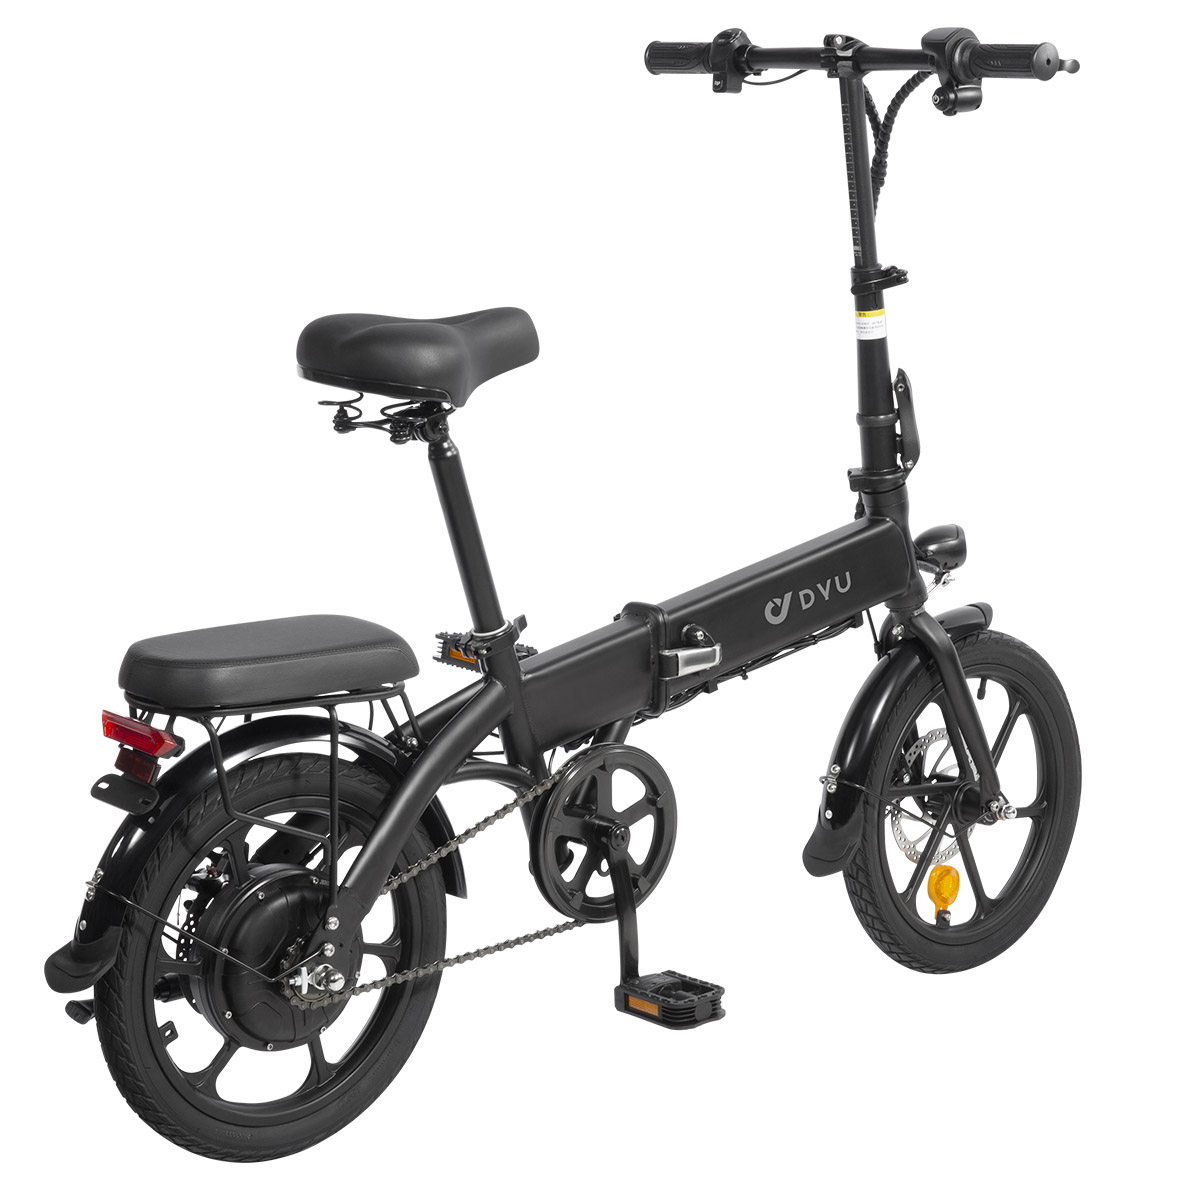 Find EU Direct DYU A1F 36V 250W 7 5AH 16inch Folding Electric Bicycle 25KM/H Speed 50 60KM Mileage Electric Bike for Sale on Gipsybee.com with cryptocurrencies